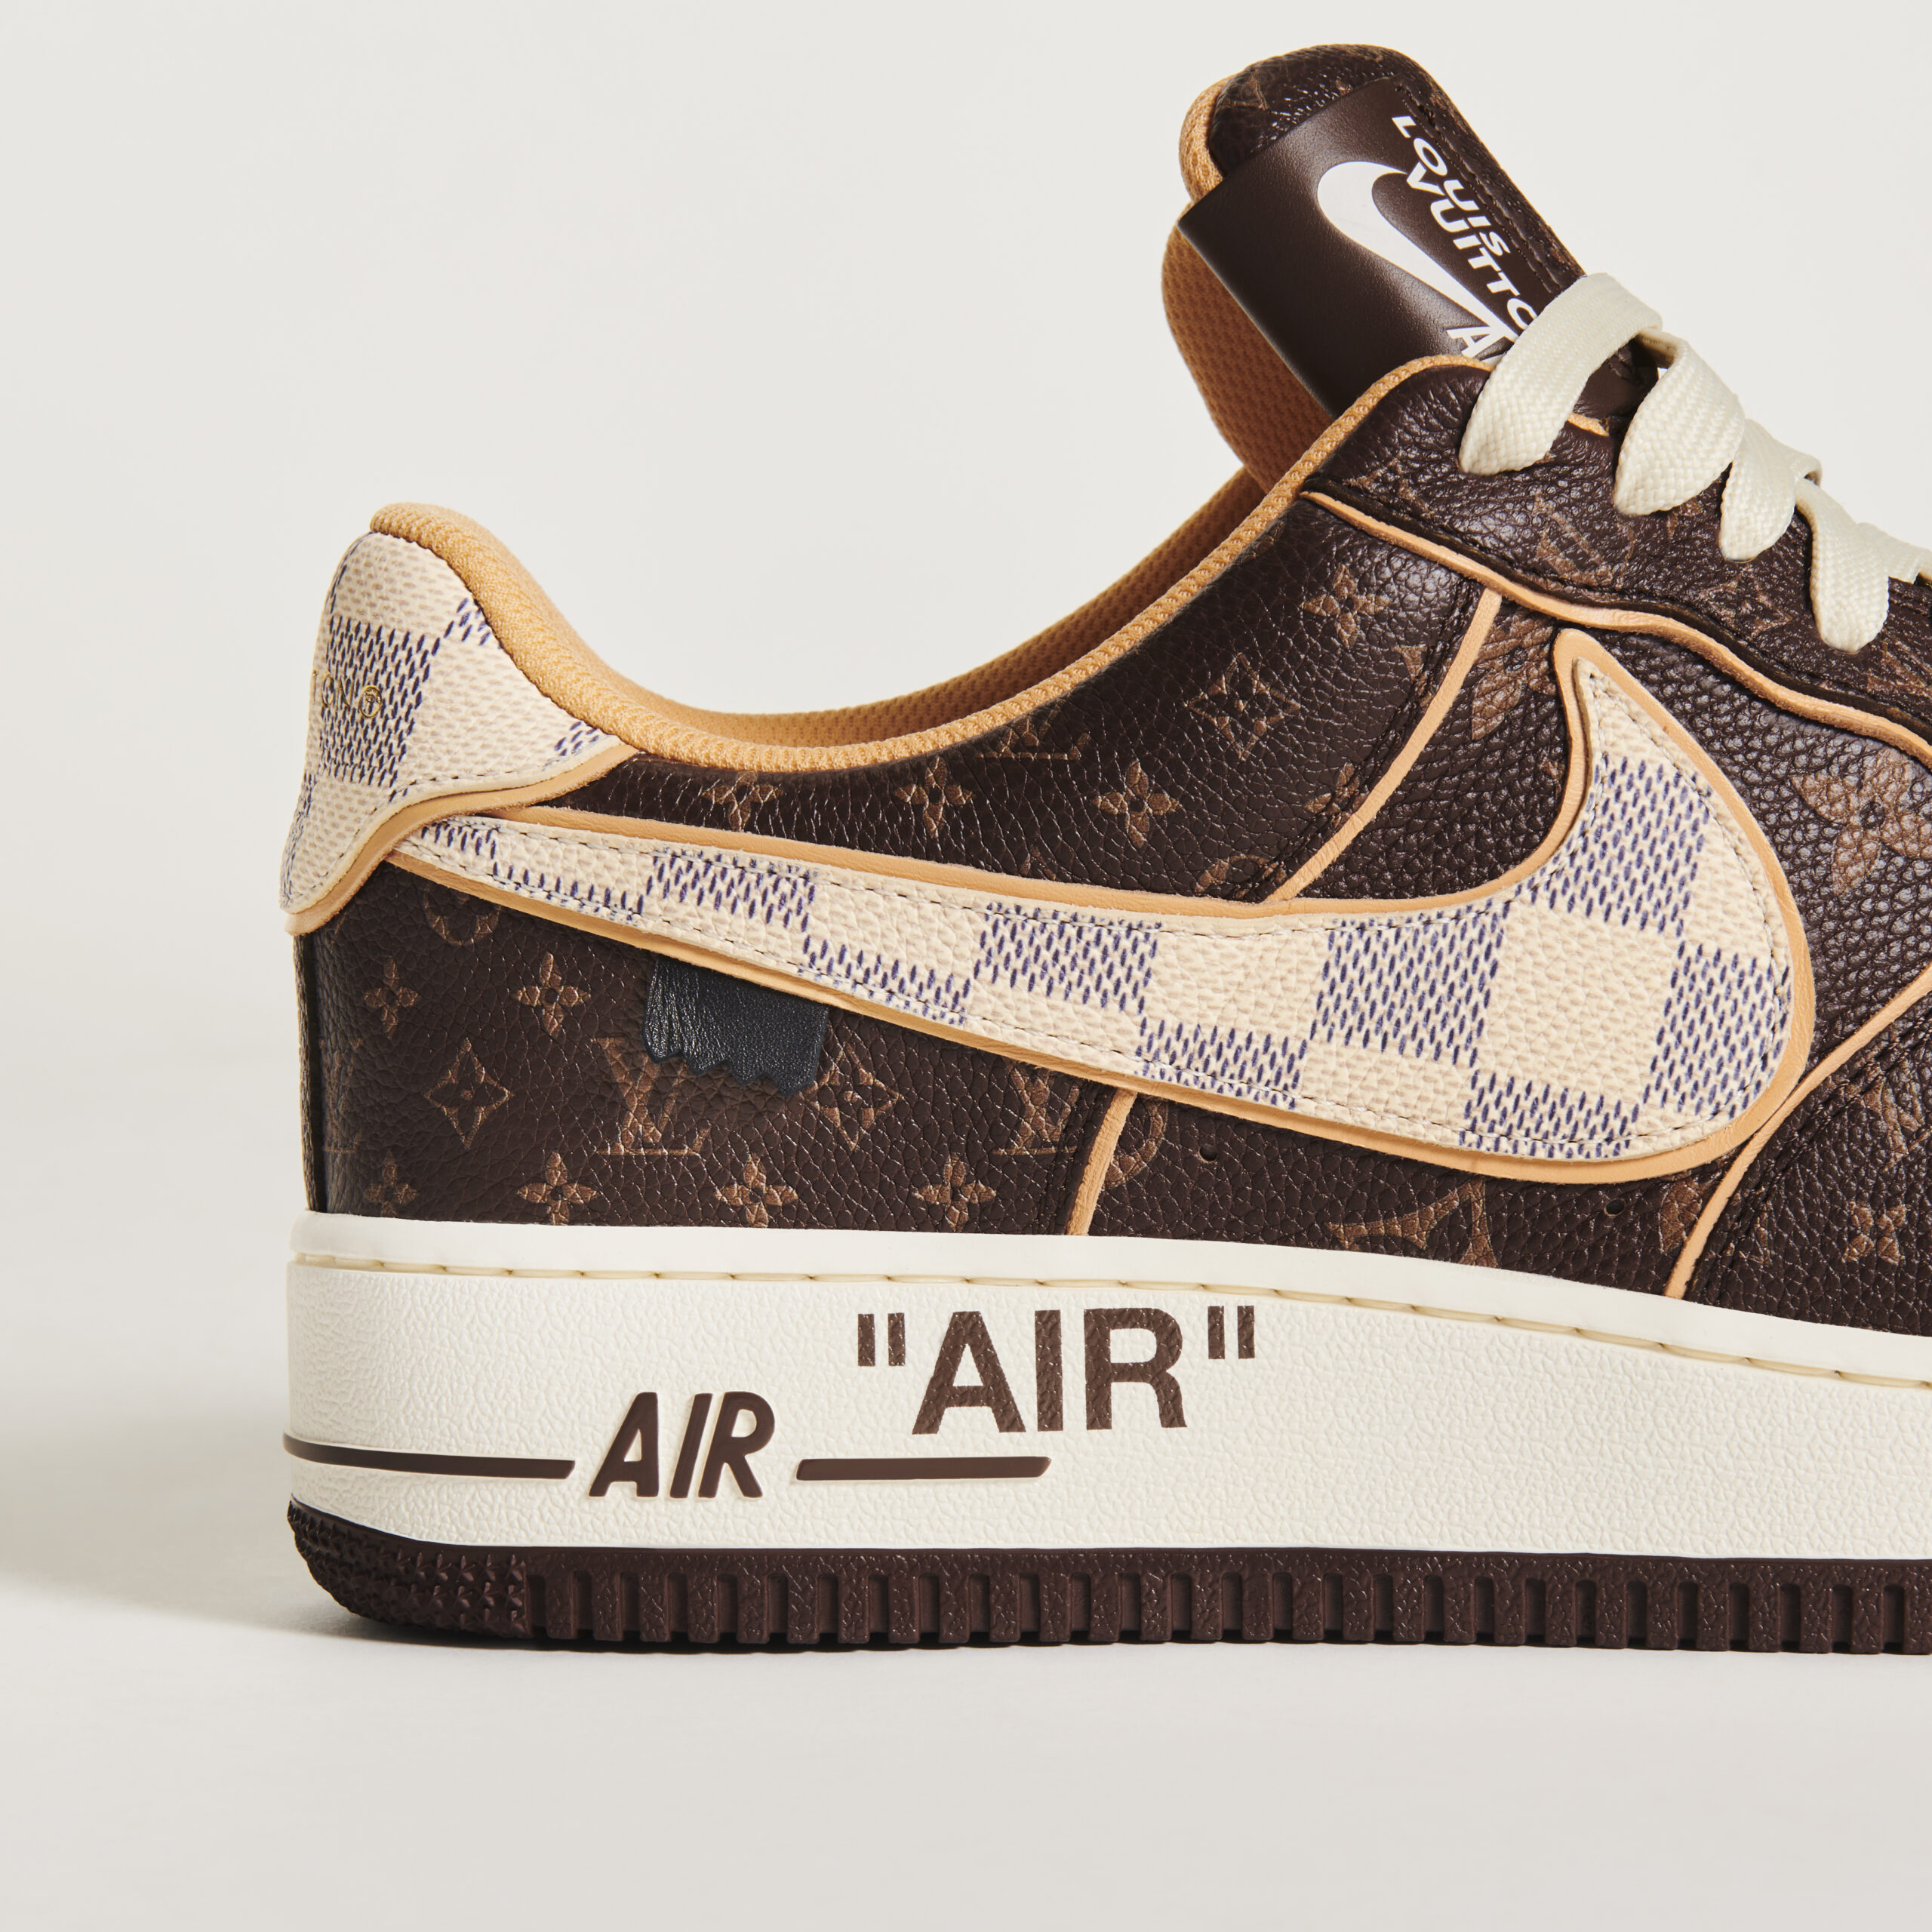 Louis Vuitton, Virgil Abloh, and Nike: The Expression of the “Air Force 1”